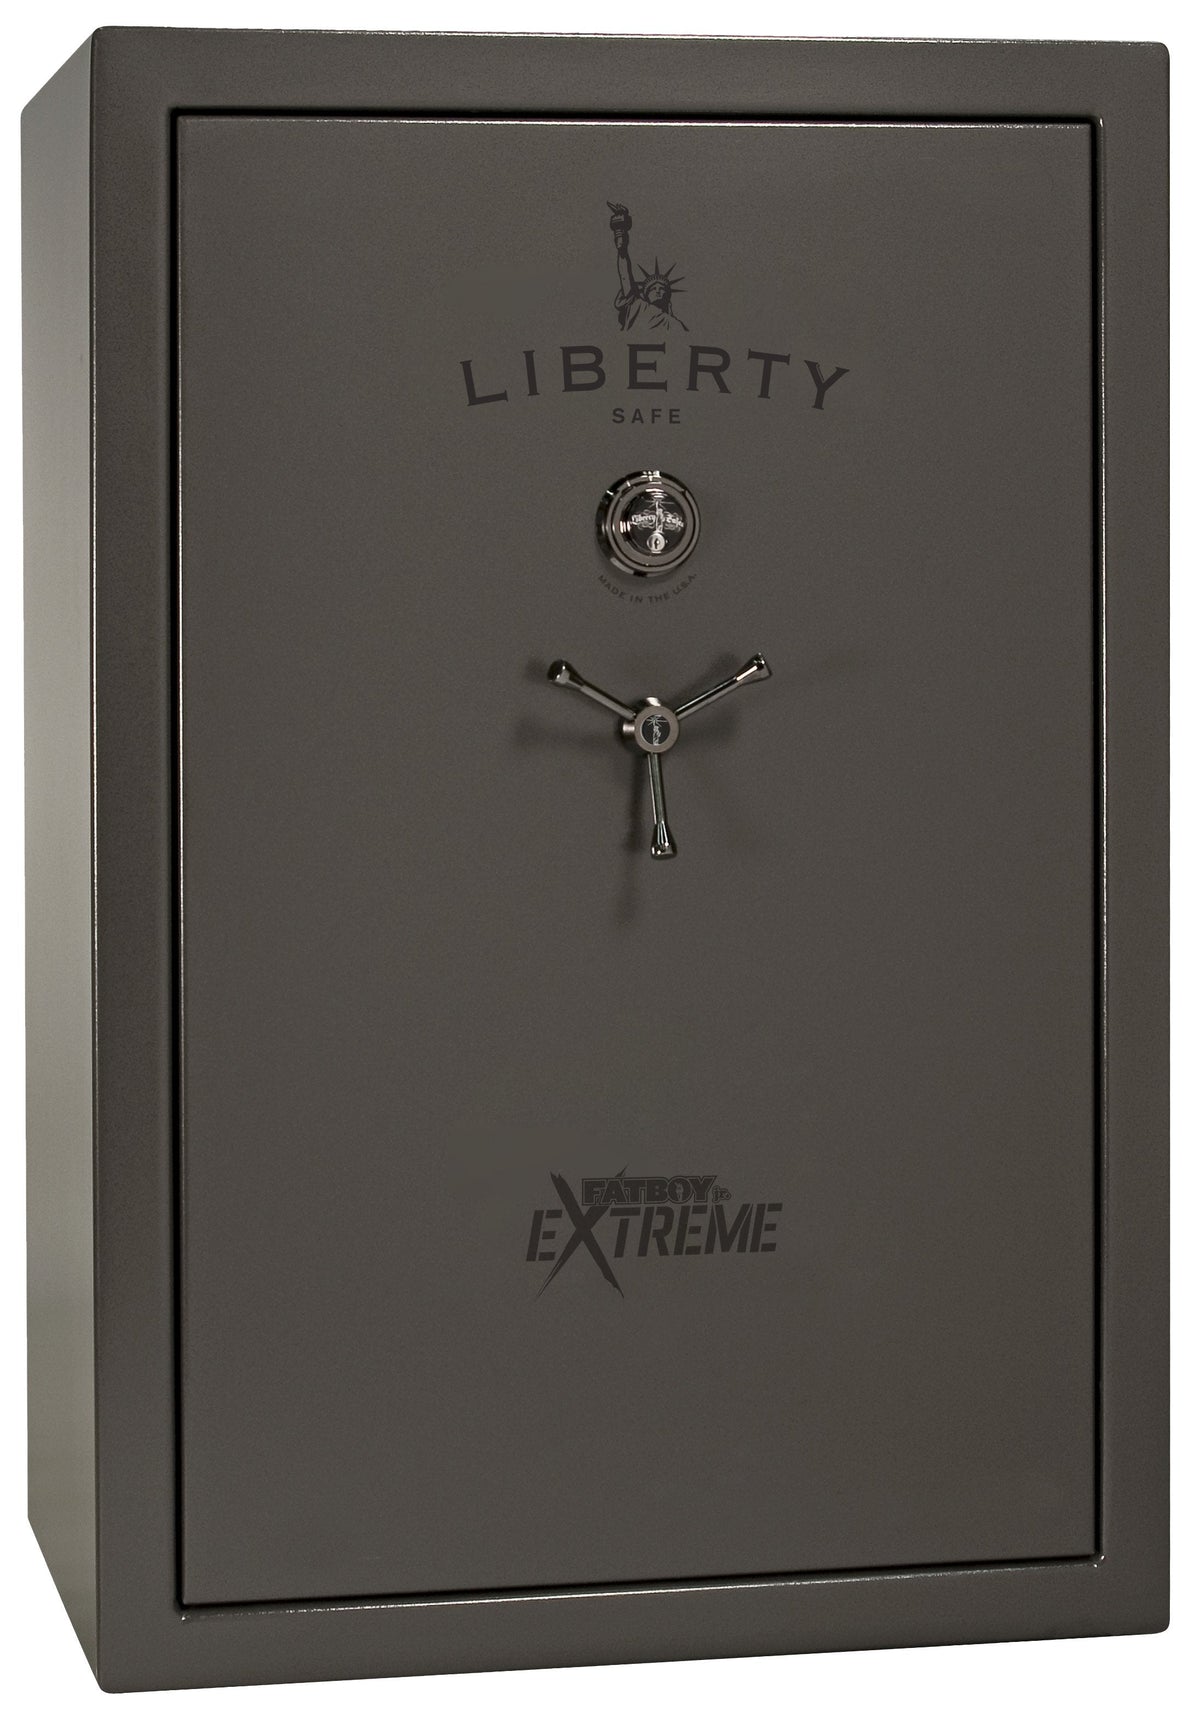 Liberty | Fatboy Jr. Series | Level 4 Security | 75 Minute Fire Protection